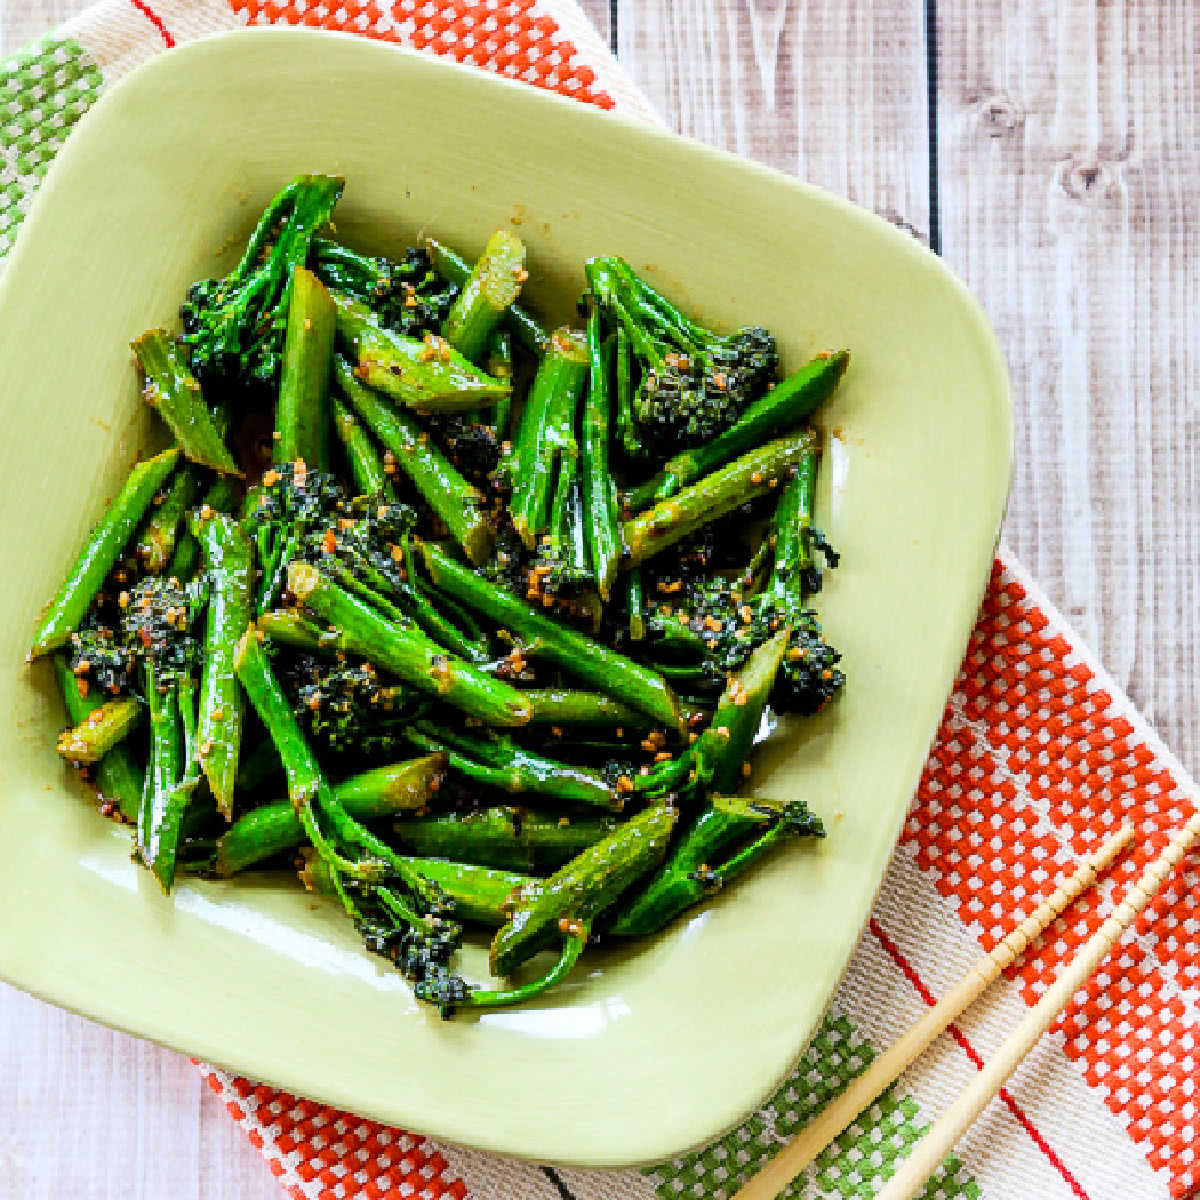 Stir-Fried Broccolini shown on serving plate with chopsticks